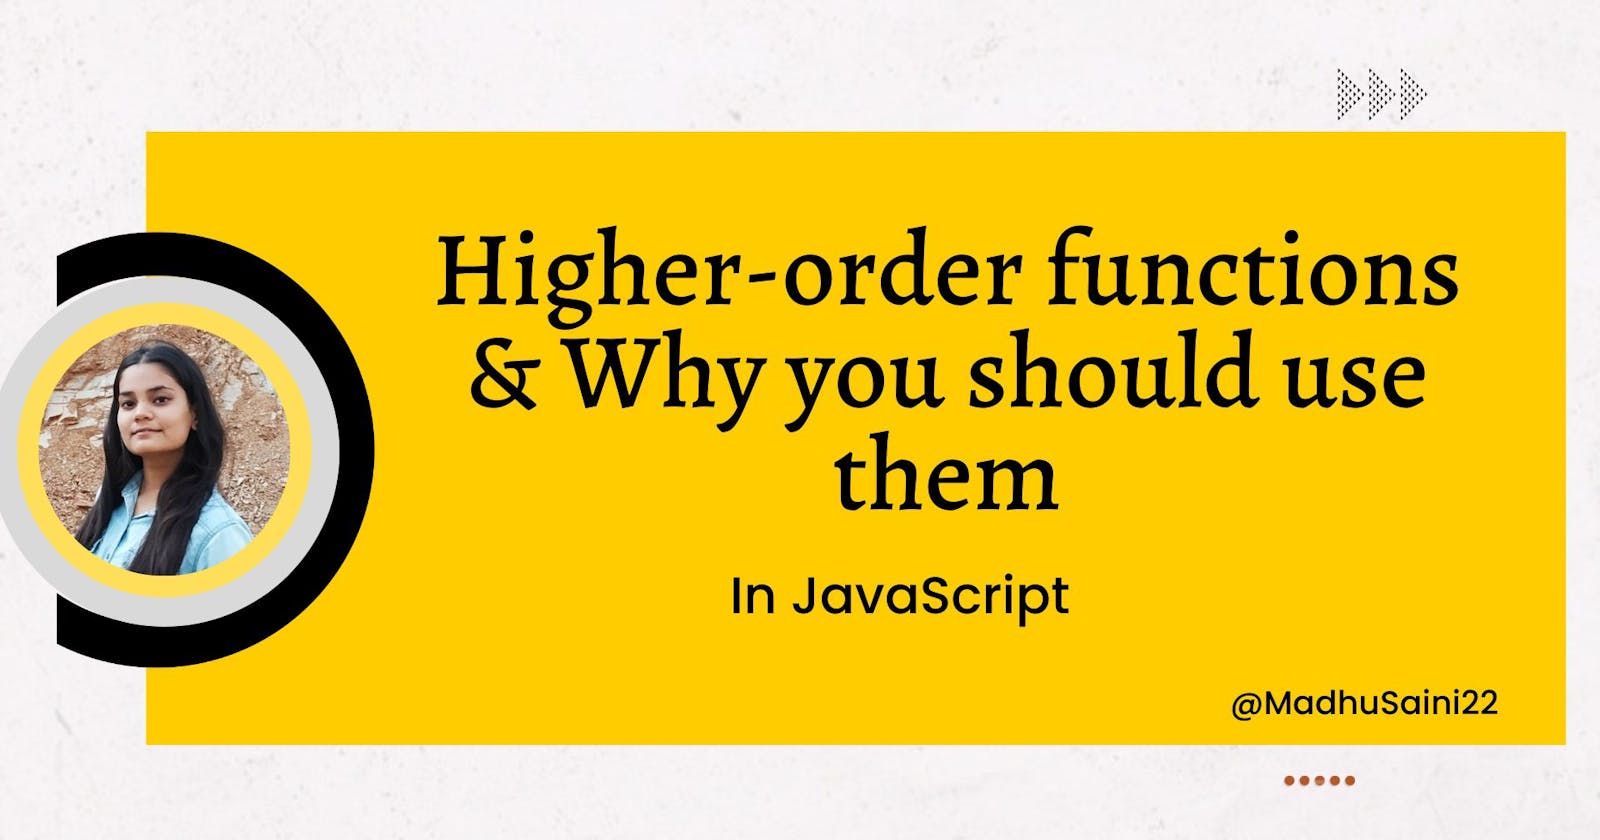 What is Higher Order Functions & Why you should use them?